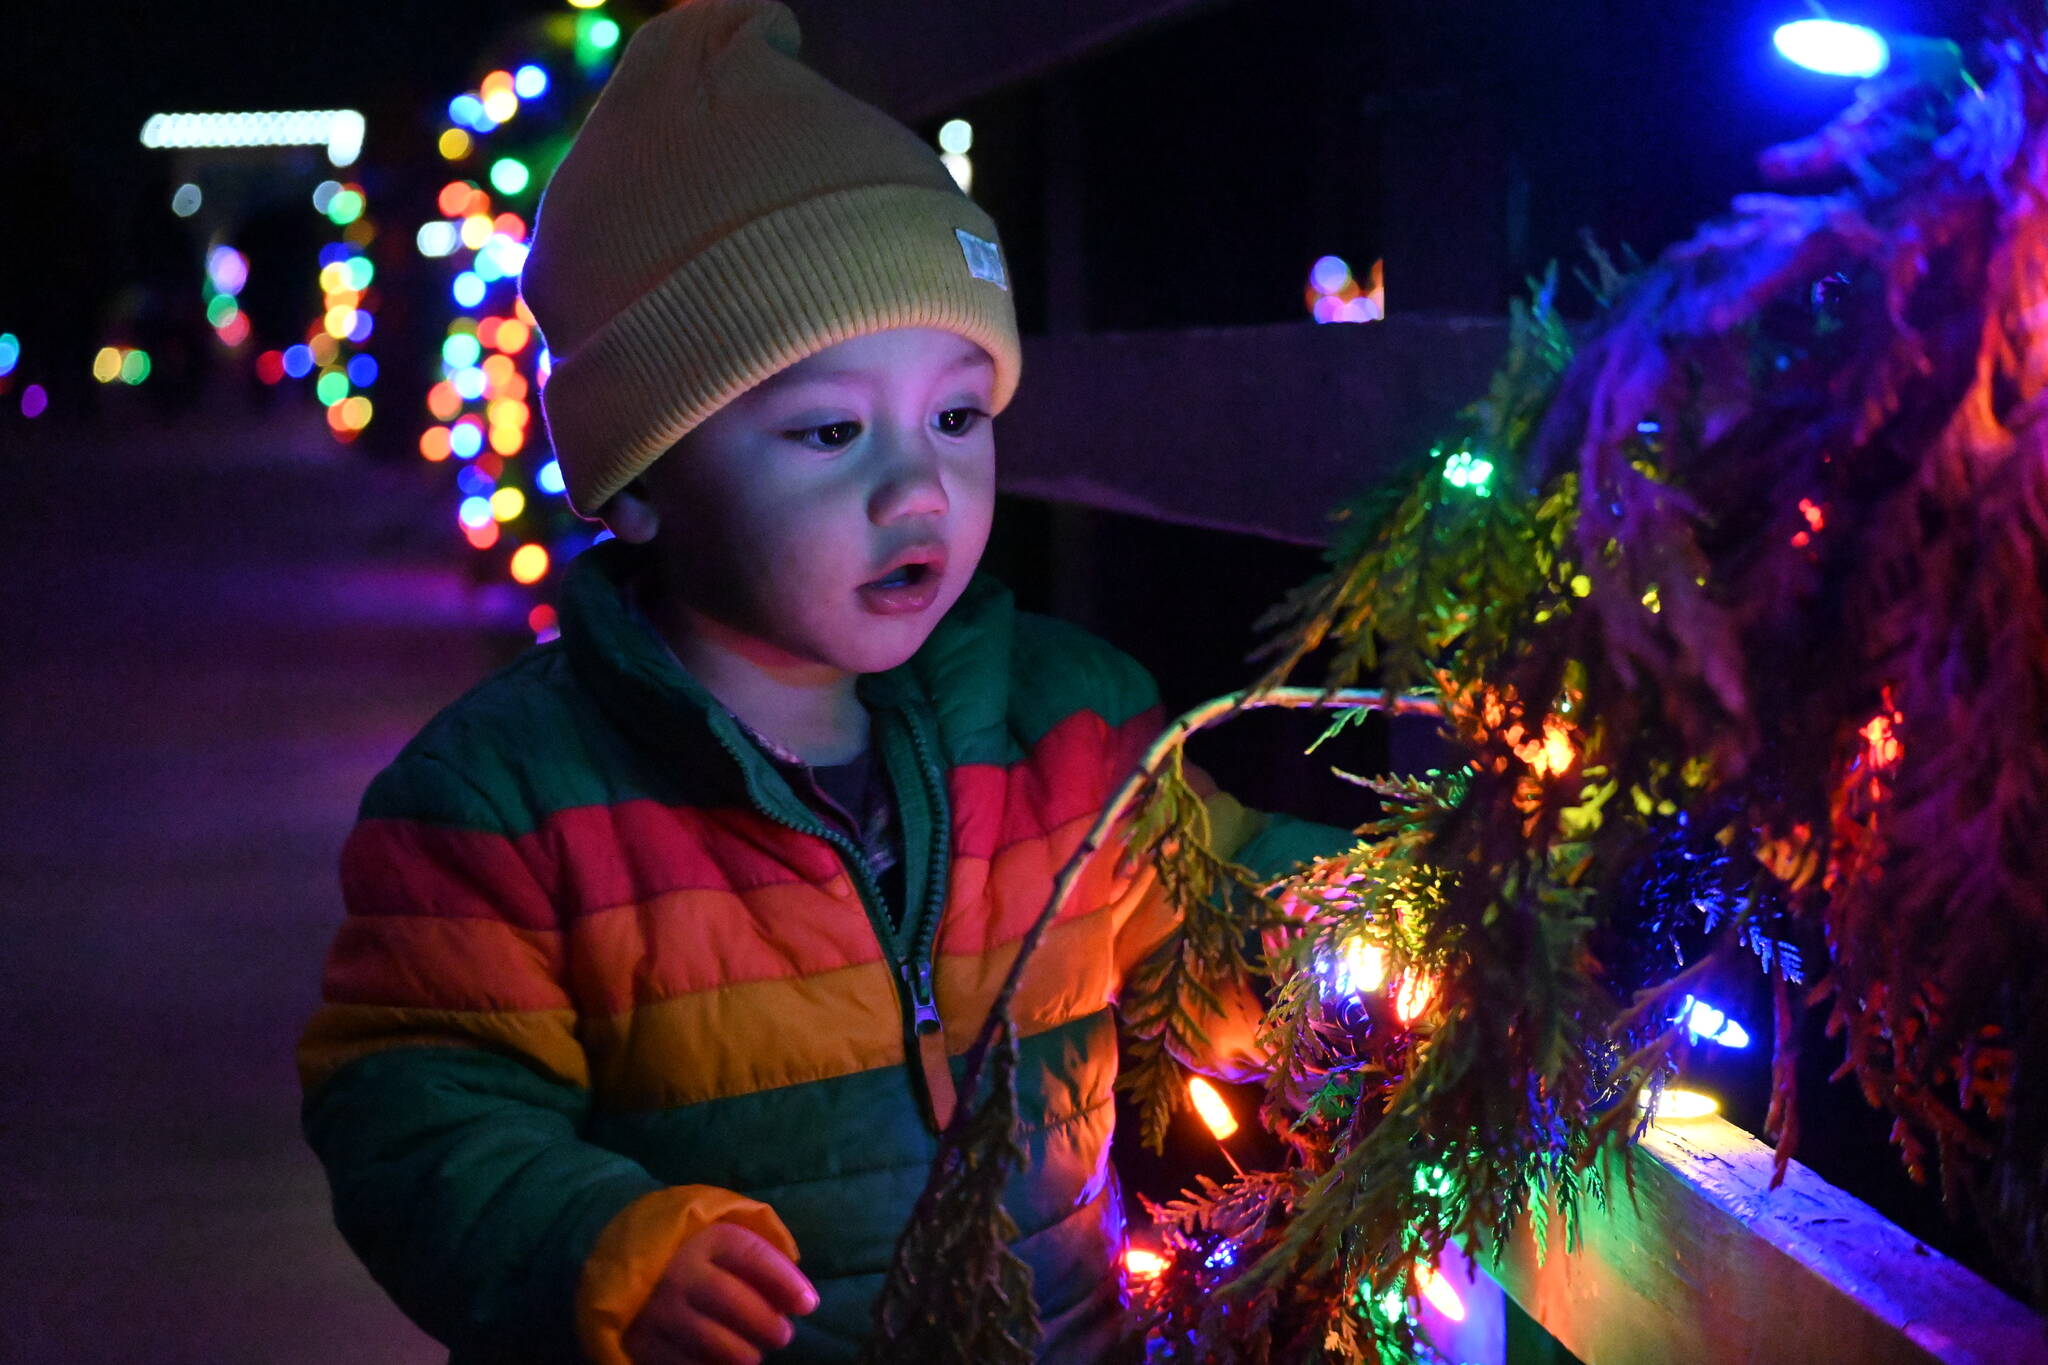 Sequim Gazette photo by Michael Dashiell
Fifteen-month-old Thomas Hanna enjoys the newly-lit historic Railroad Bridge at Railroad Bridge Park on Saturday, Nov. 19. The annual River Center Holiday Nature Mart at the park’s Dungeness River Nature Center, held Saturday and Sunday Nov. 19-20, coincided with Saturday’s bridge lighting. The bridge’s lights will be on display each day at 3 p.m. through December.